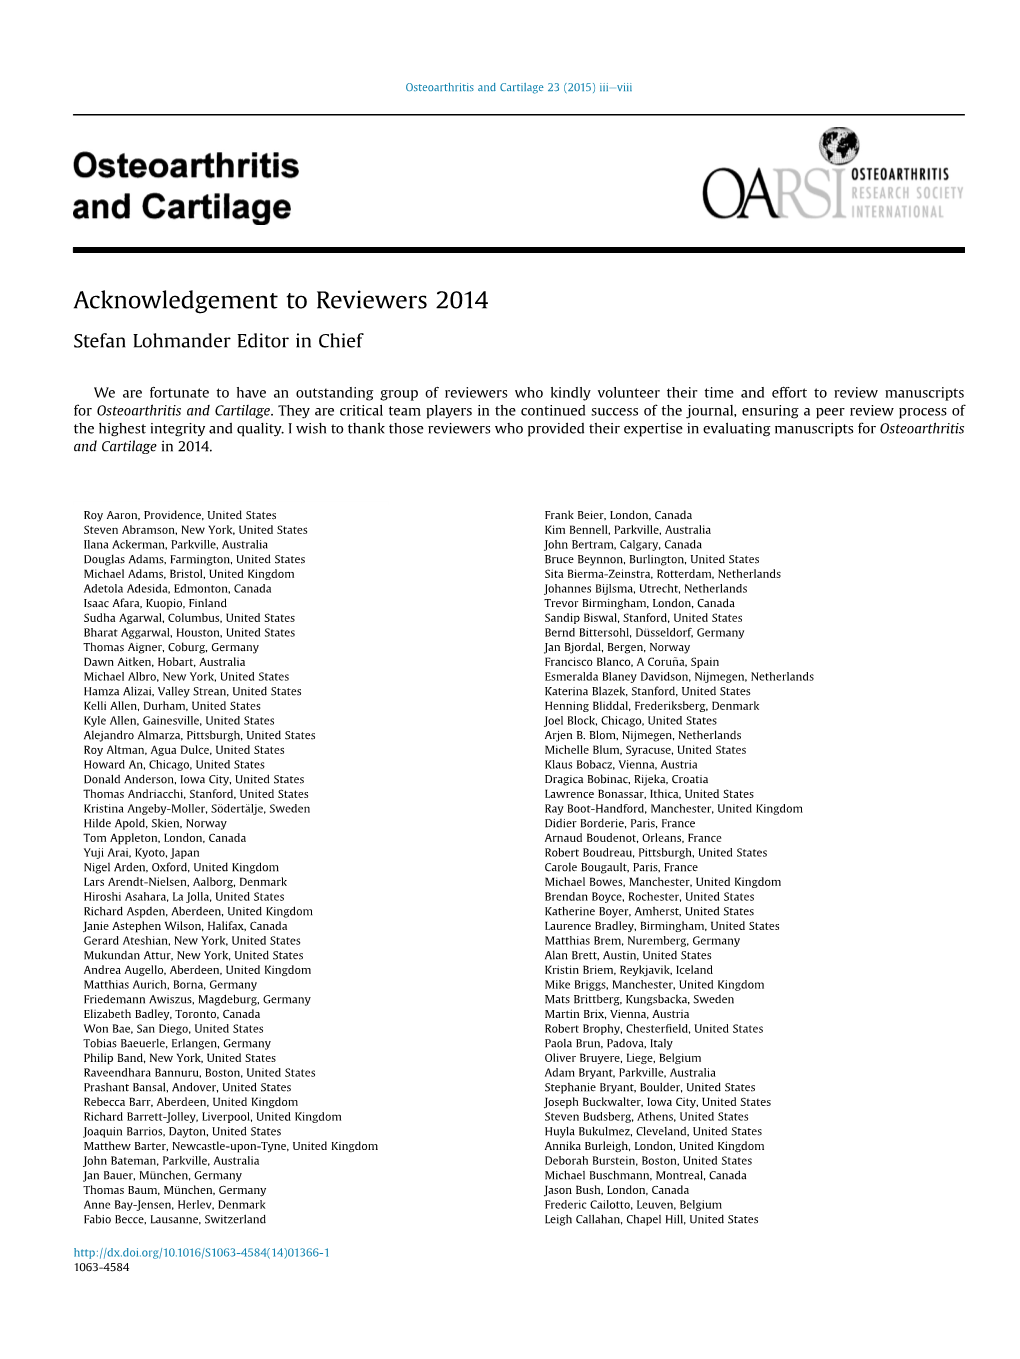 Acknowledgement to Reviewers 2014